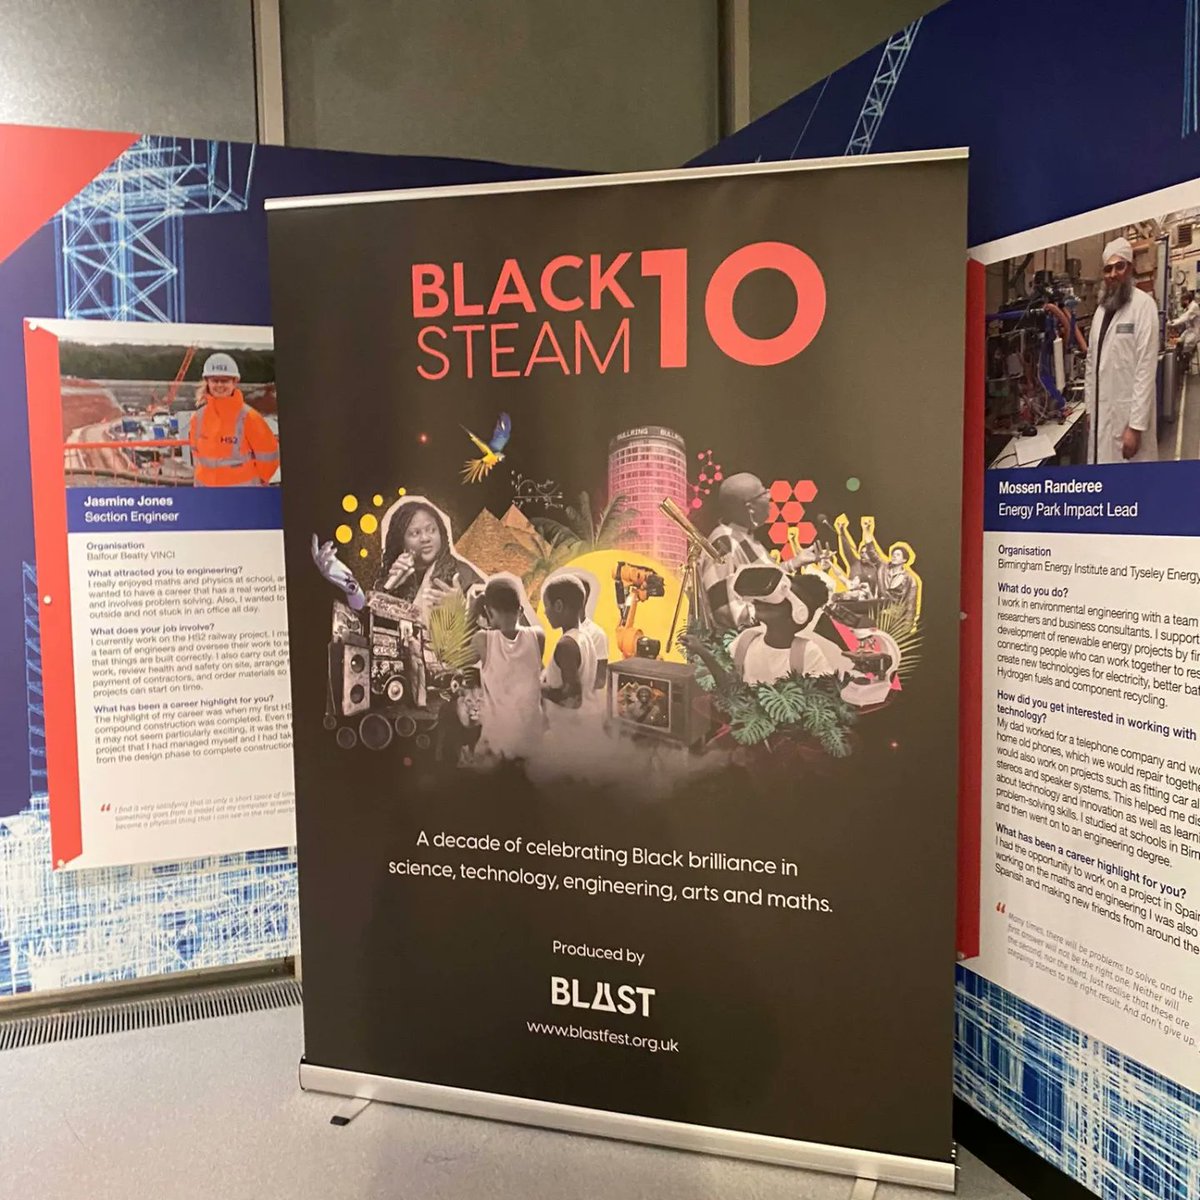 We've had a wonderful time at Black STEAM 10 today. It was great to meet so many current and future innovators! Thanks for having us @blastfestuk